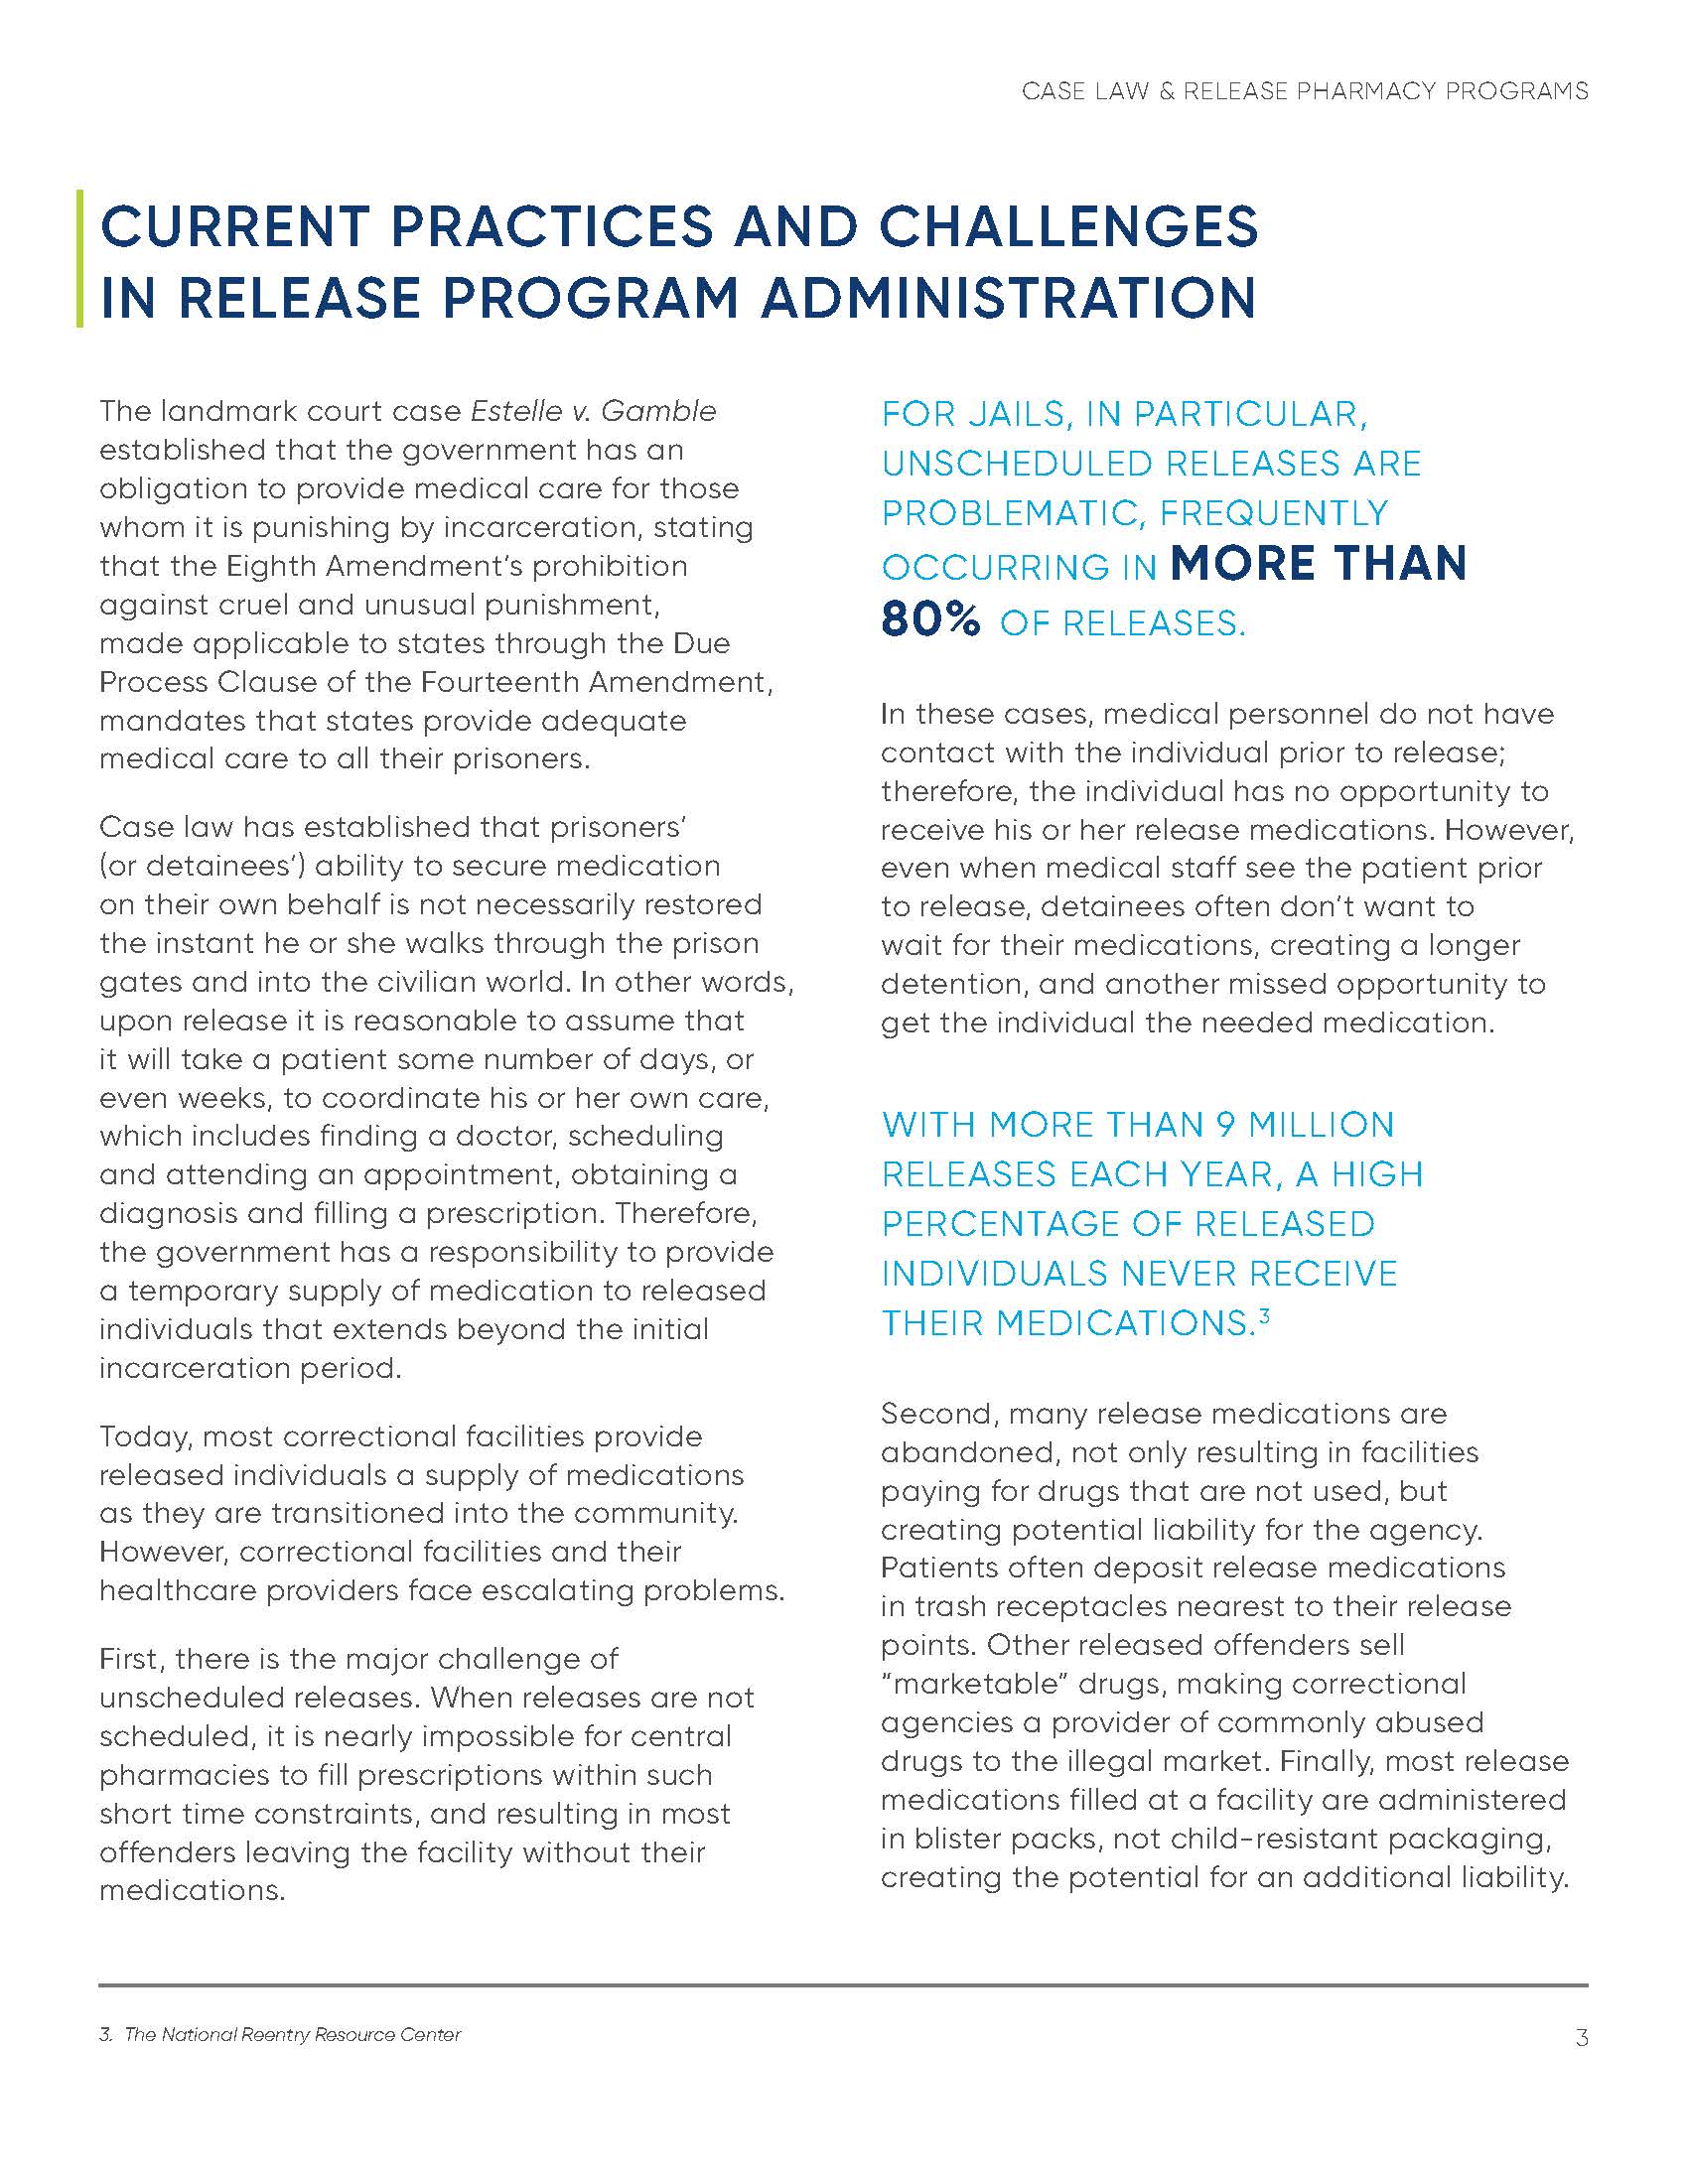 InMedRx Release White Paper_FINAL_022220 (1)_Page_3.jpg